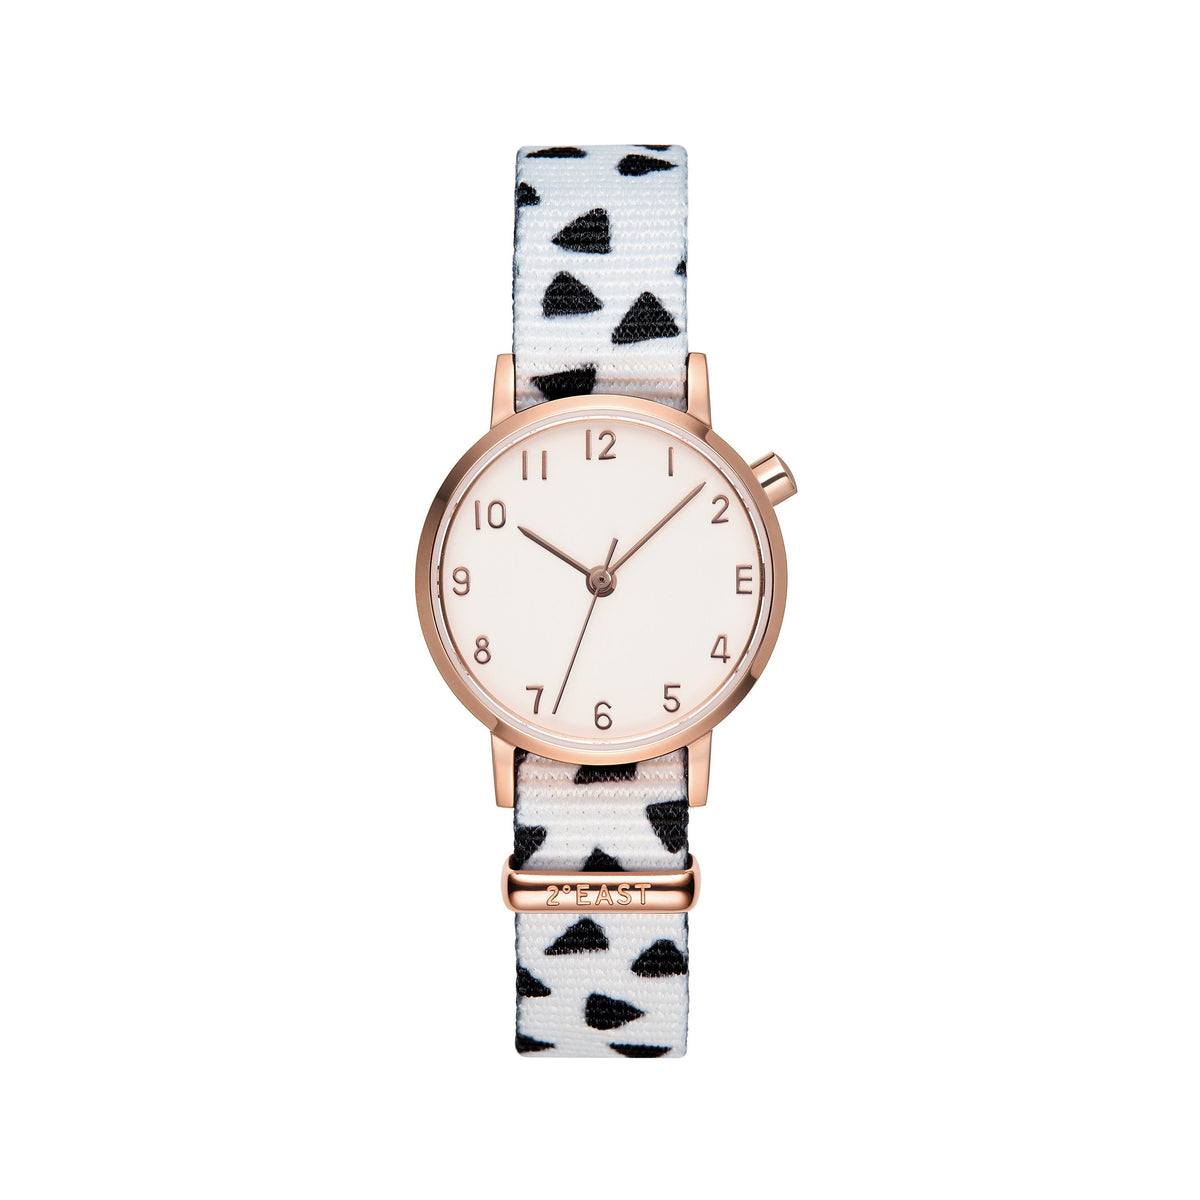 The White and Rose Gold Watch - Triangles (Kids)